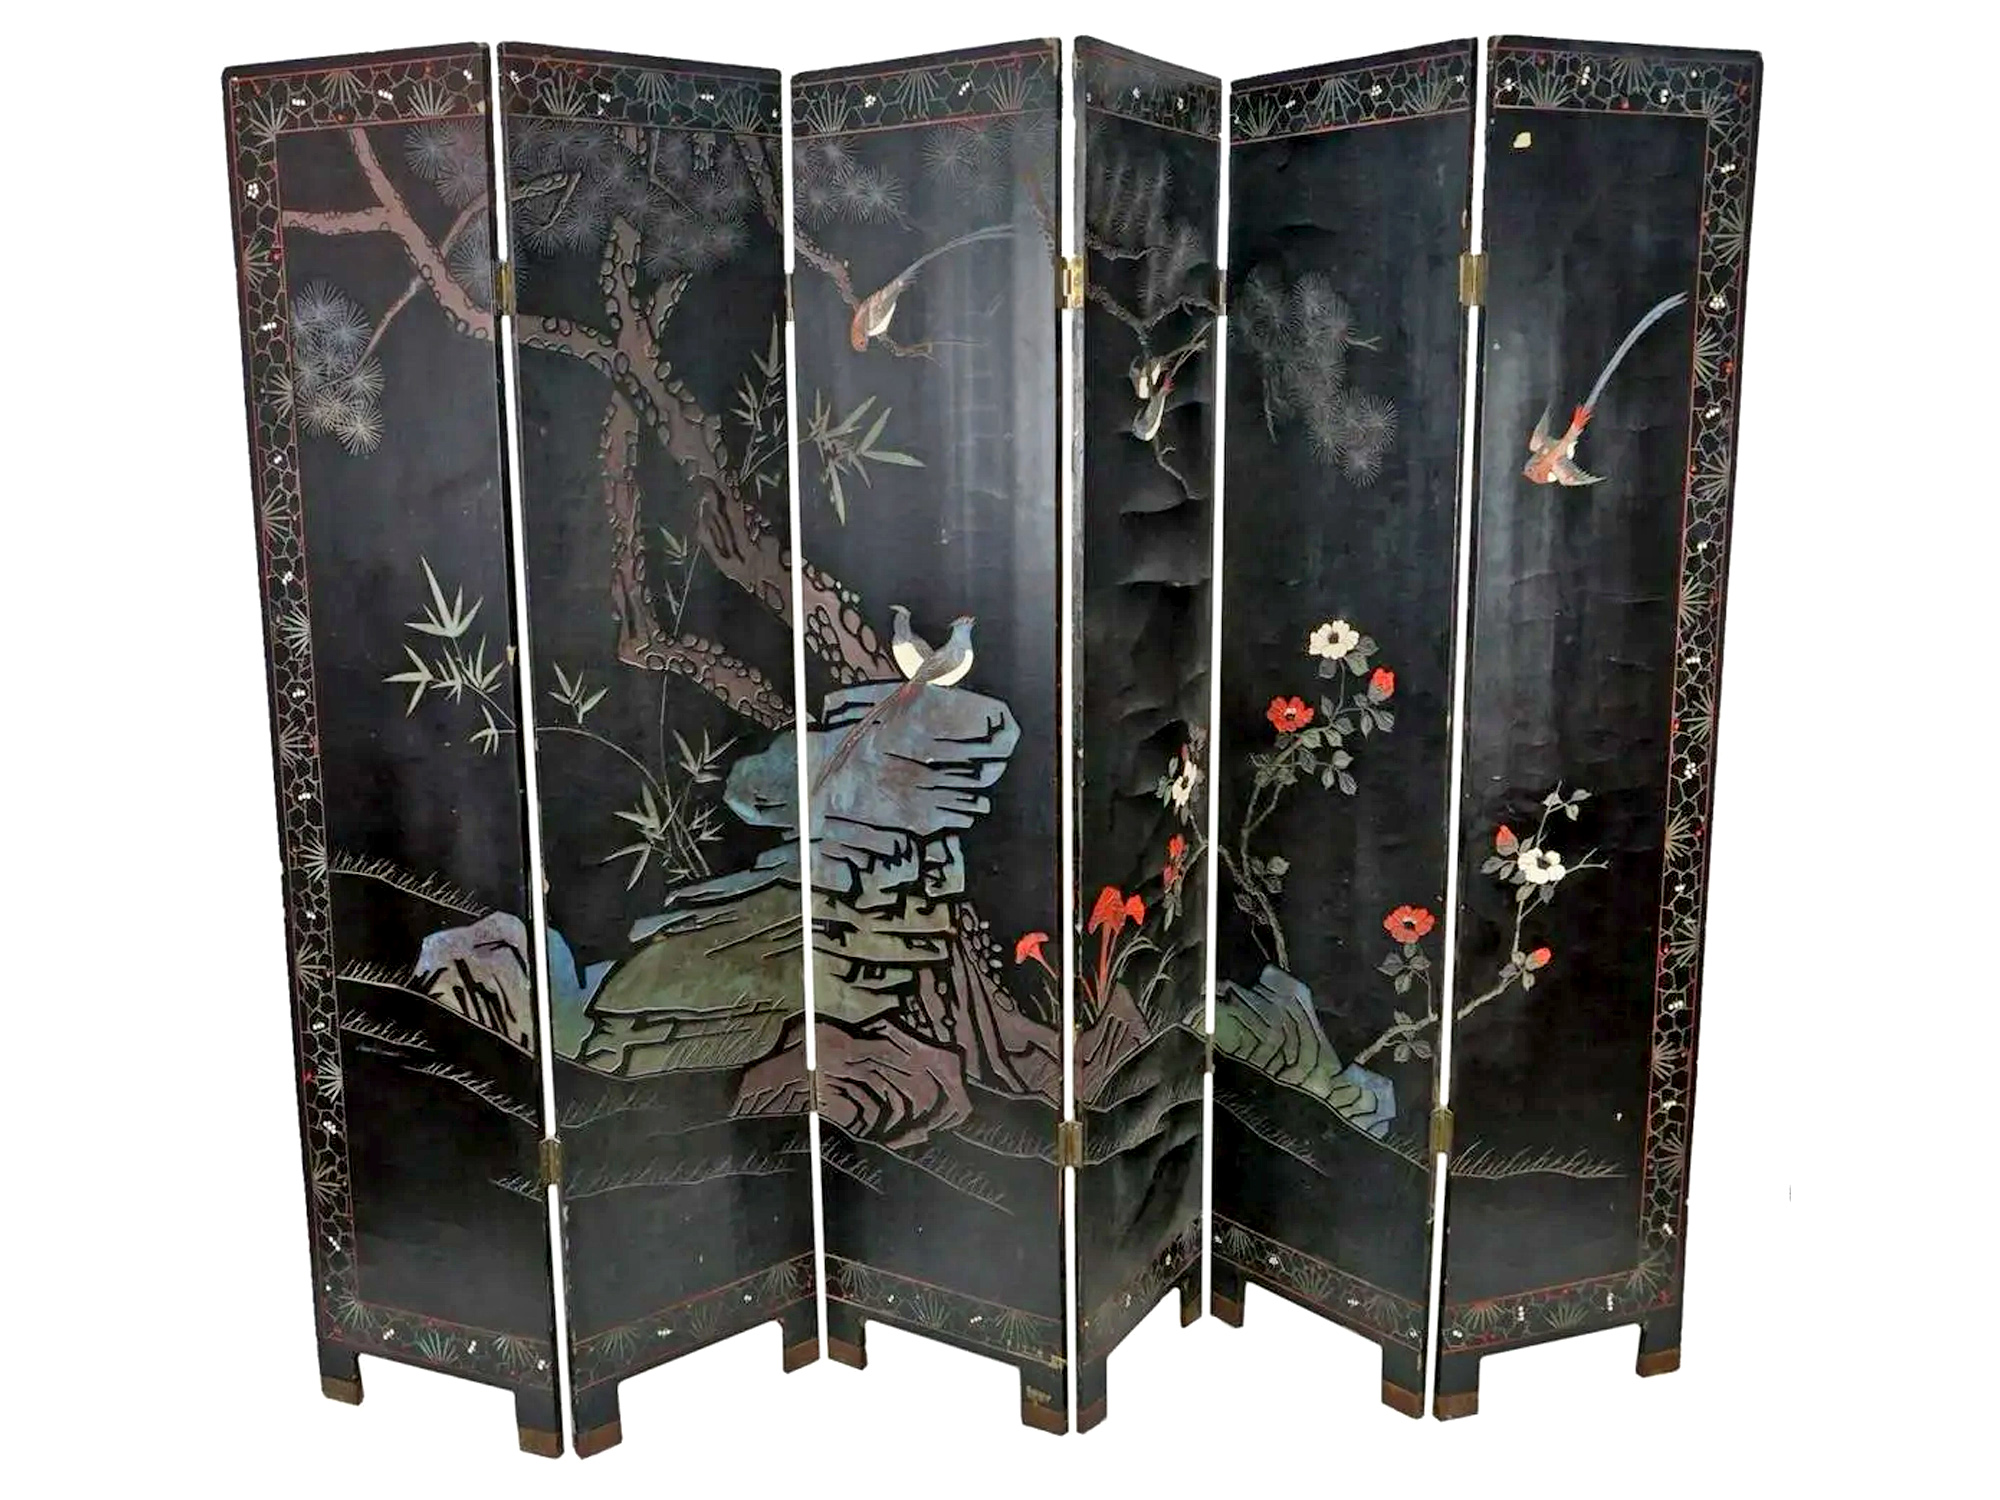 CHINESE EXPORT ROOM DIVIDER LACQUERED HAND PAINTED WOOD PIC-1